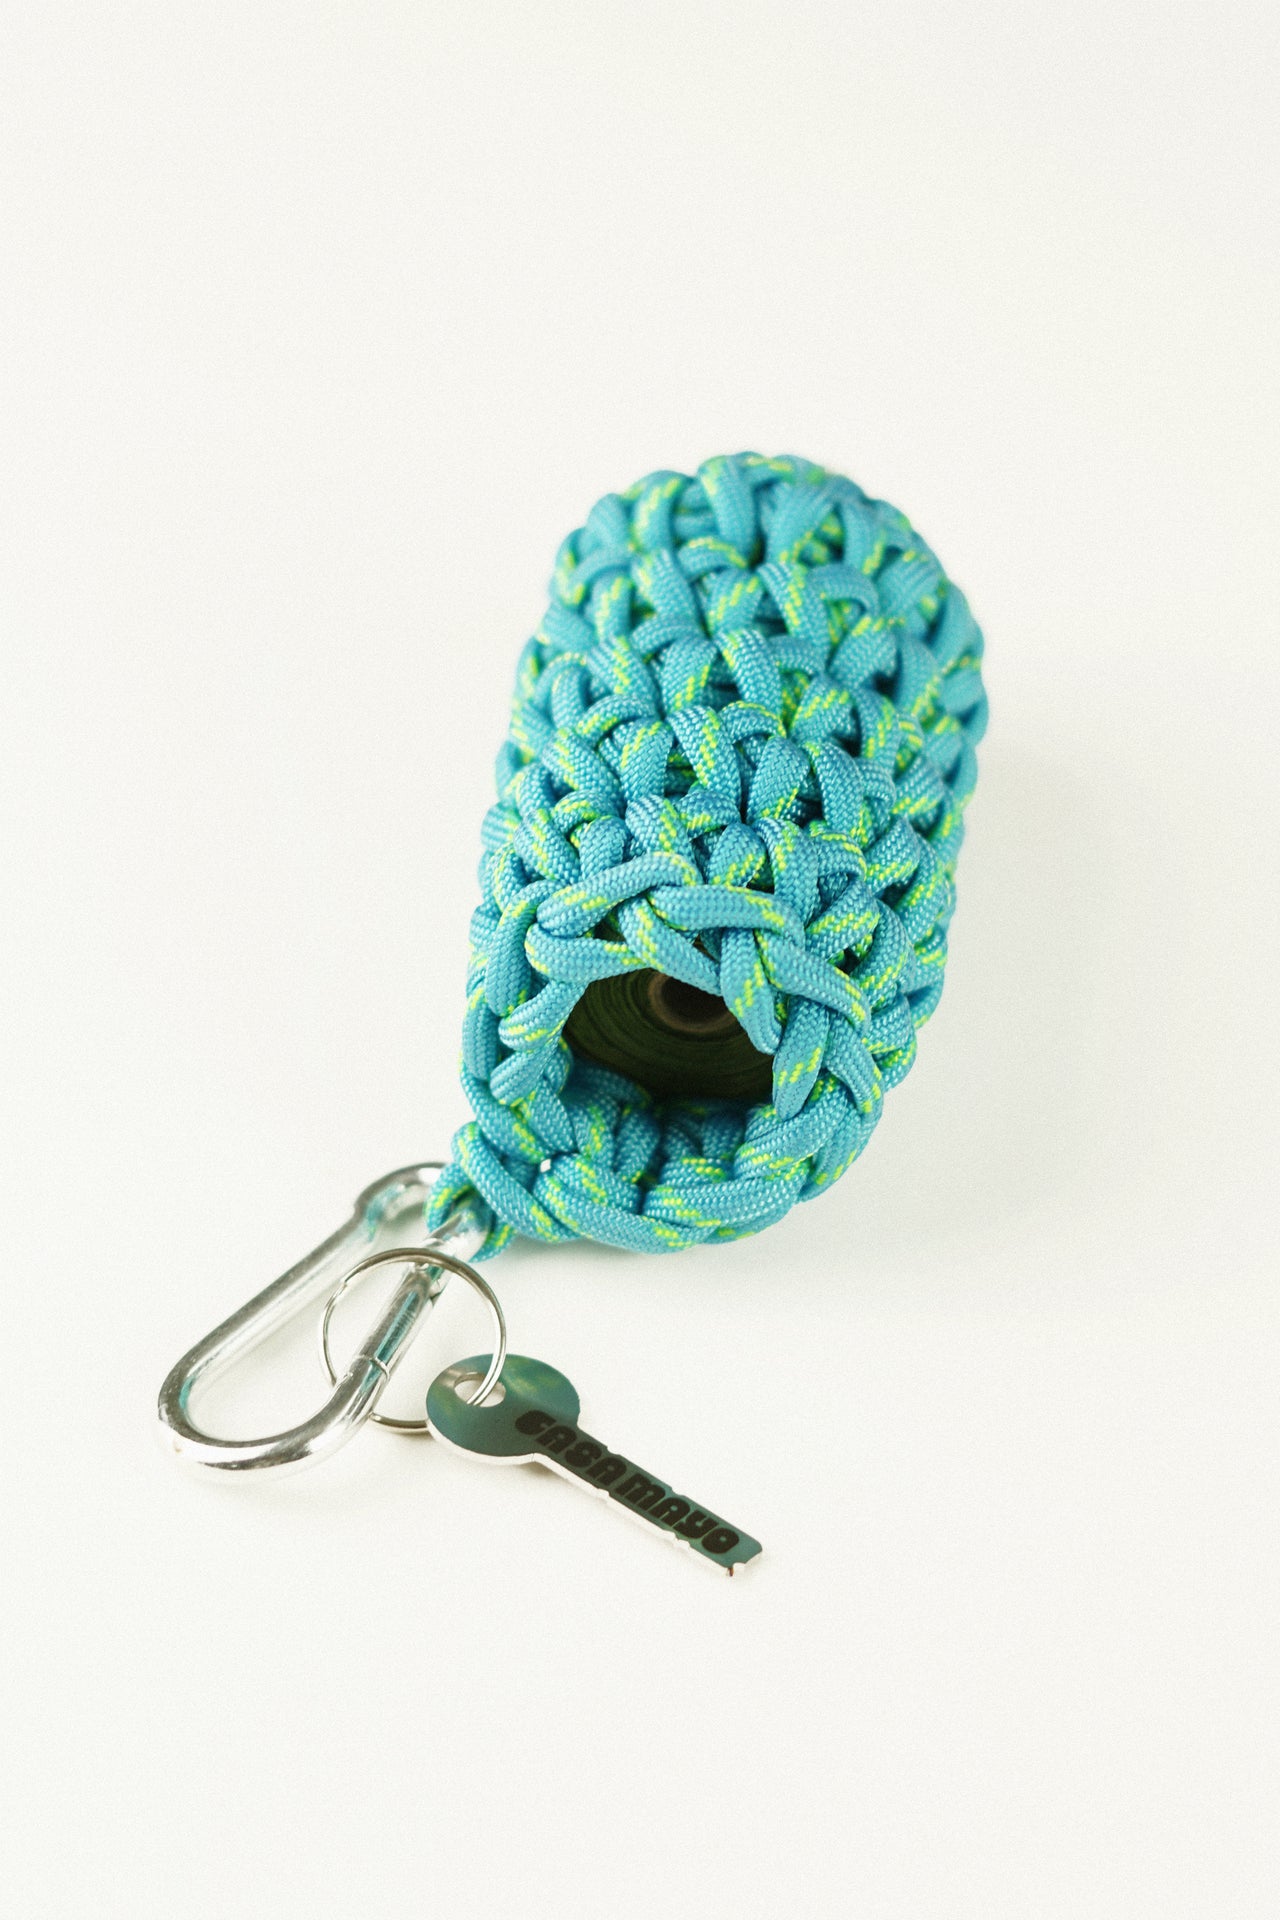 Blue and green pet bag holder made of paracord rope